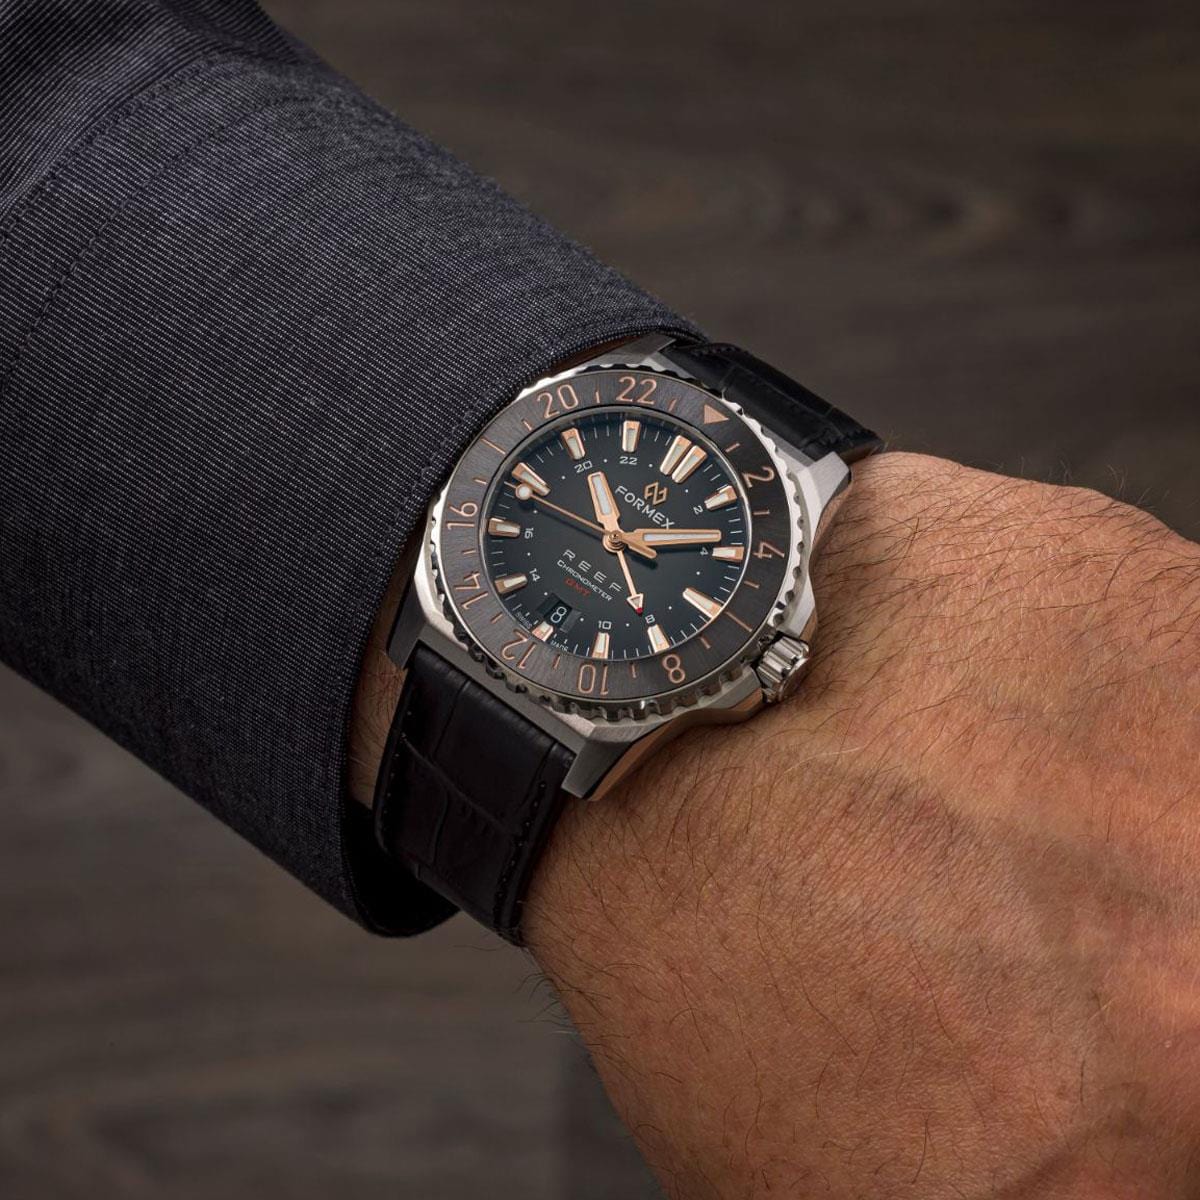 FORMEX REEF GMT - Black Dial with Rose Gold Elements - Stainless Steel Bracelet